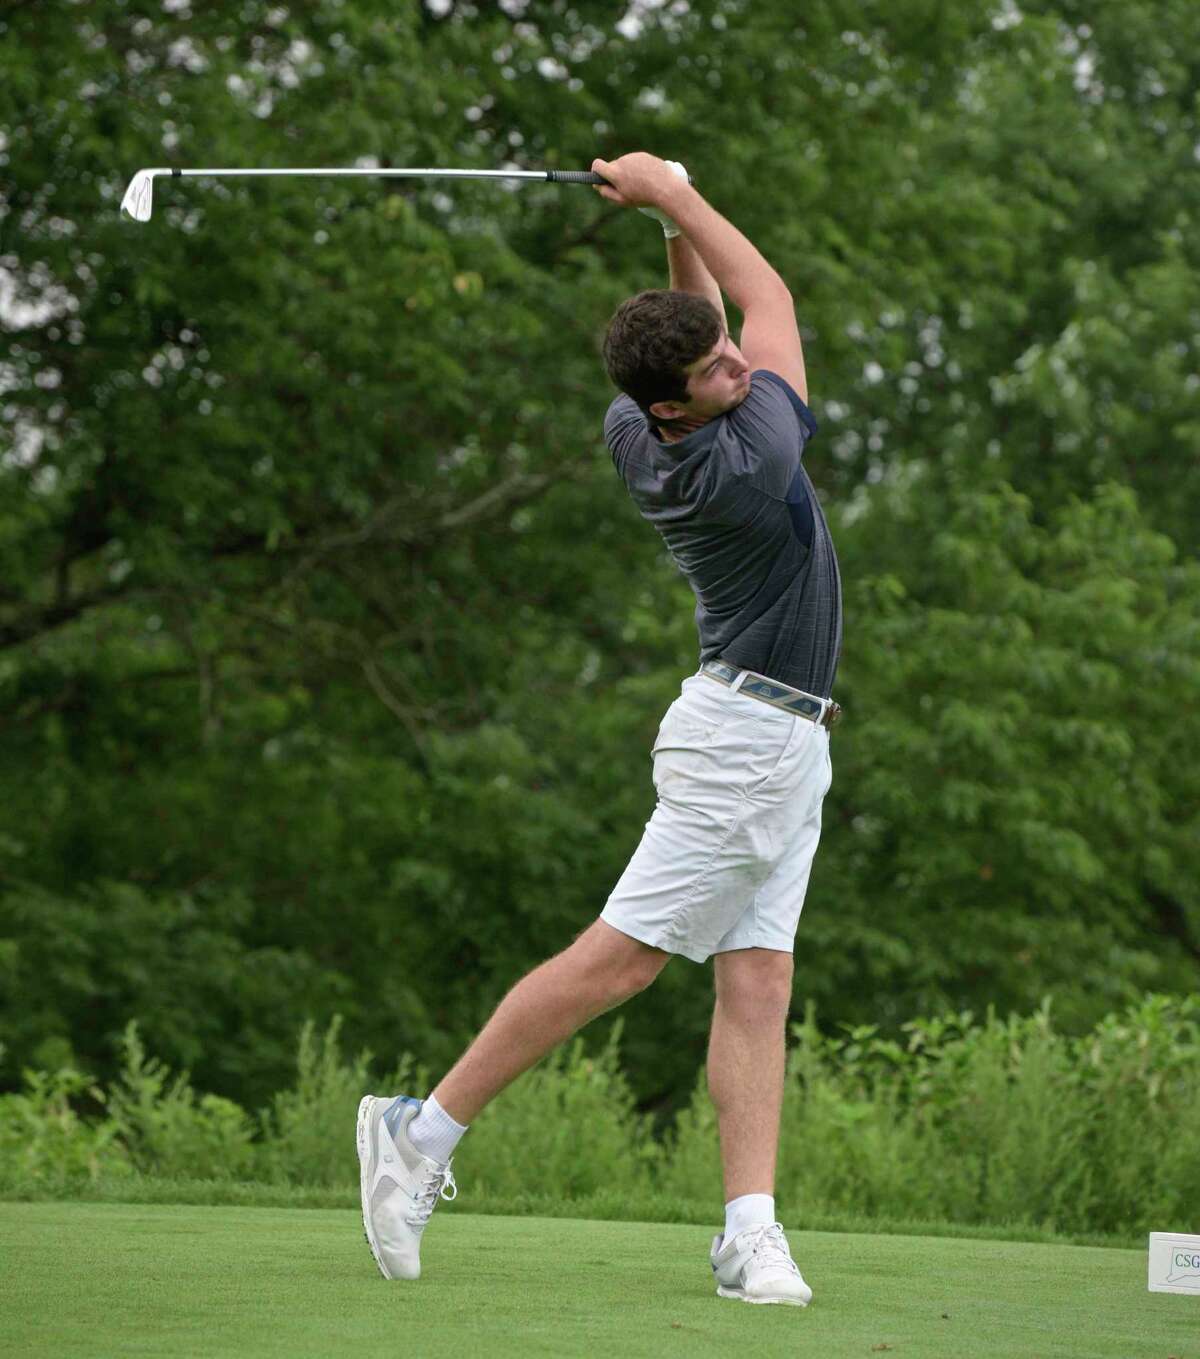 Christopher Ayers, from Goodwin Park Golf Course, hits from the 4th tee in the second round of the Connecticut Open tournament at Ridgewood CC in Danbury on Tuesday.